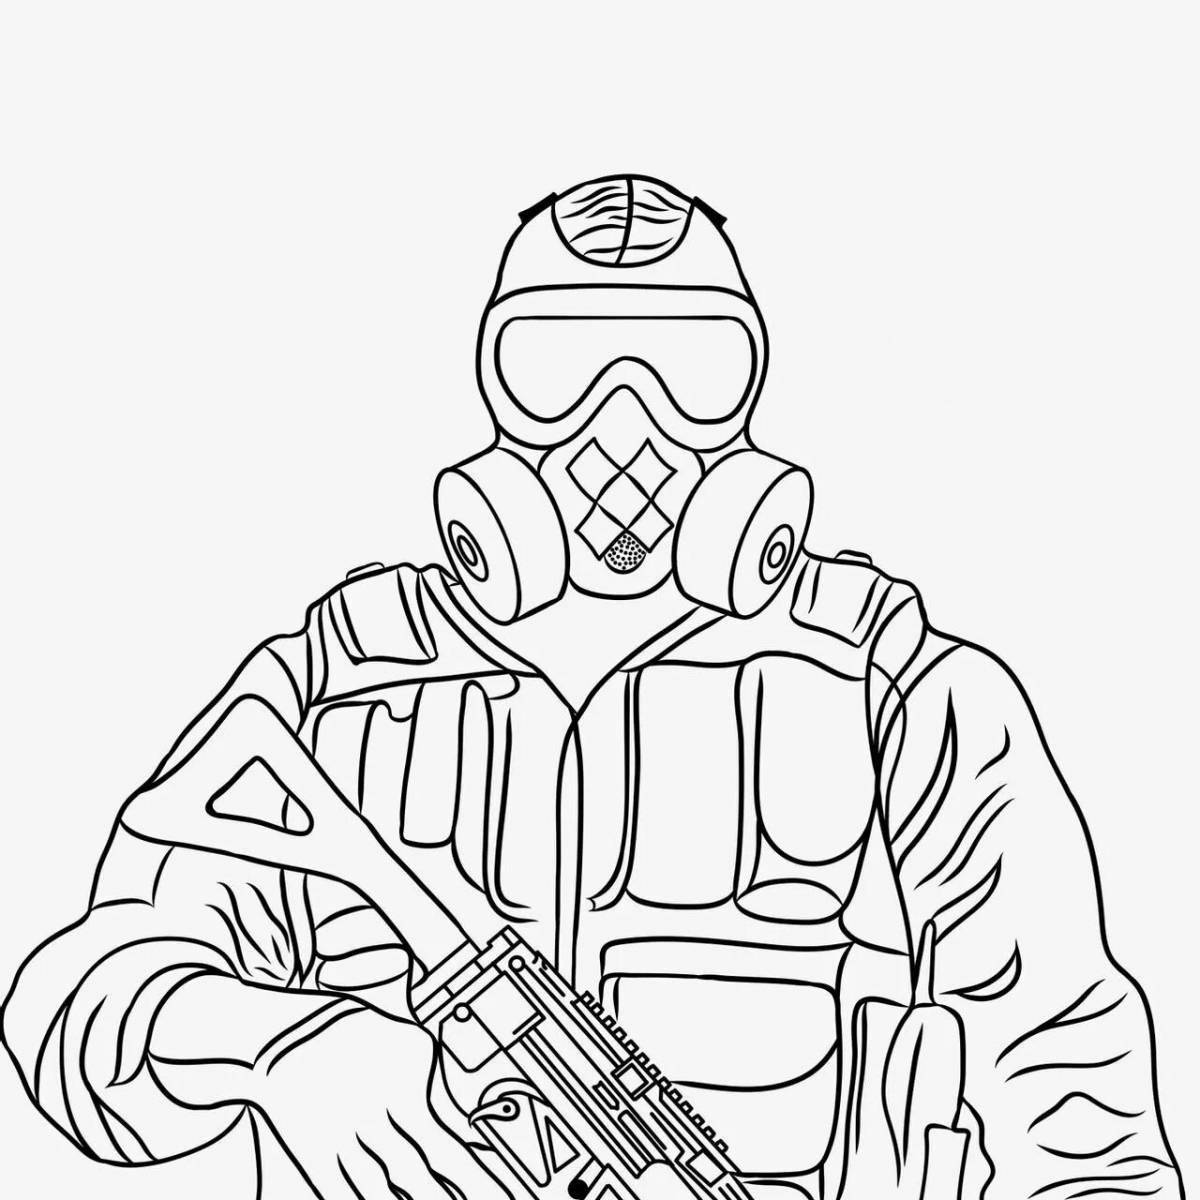 Amazing confrontation coloring page